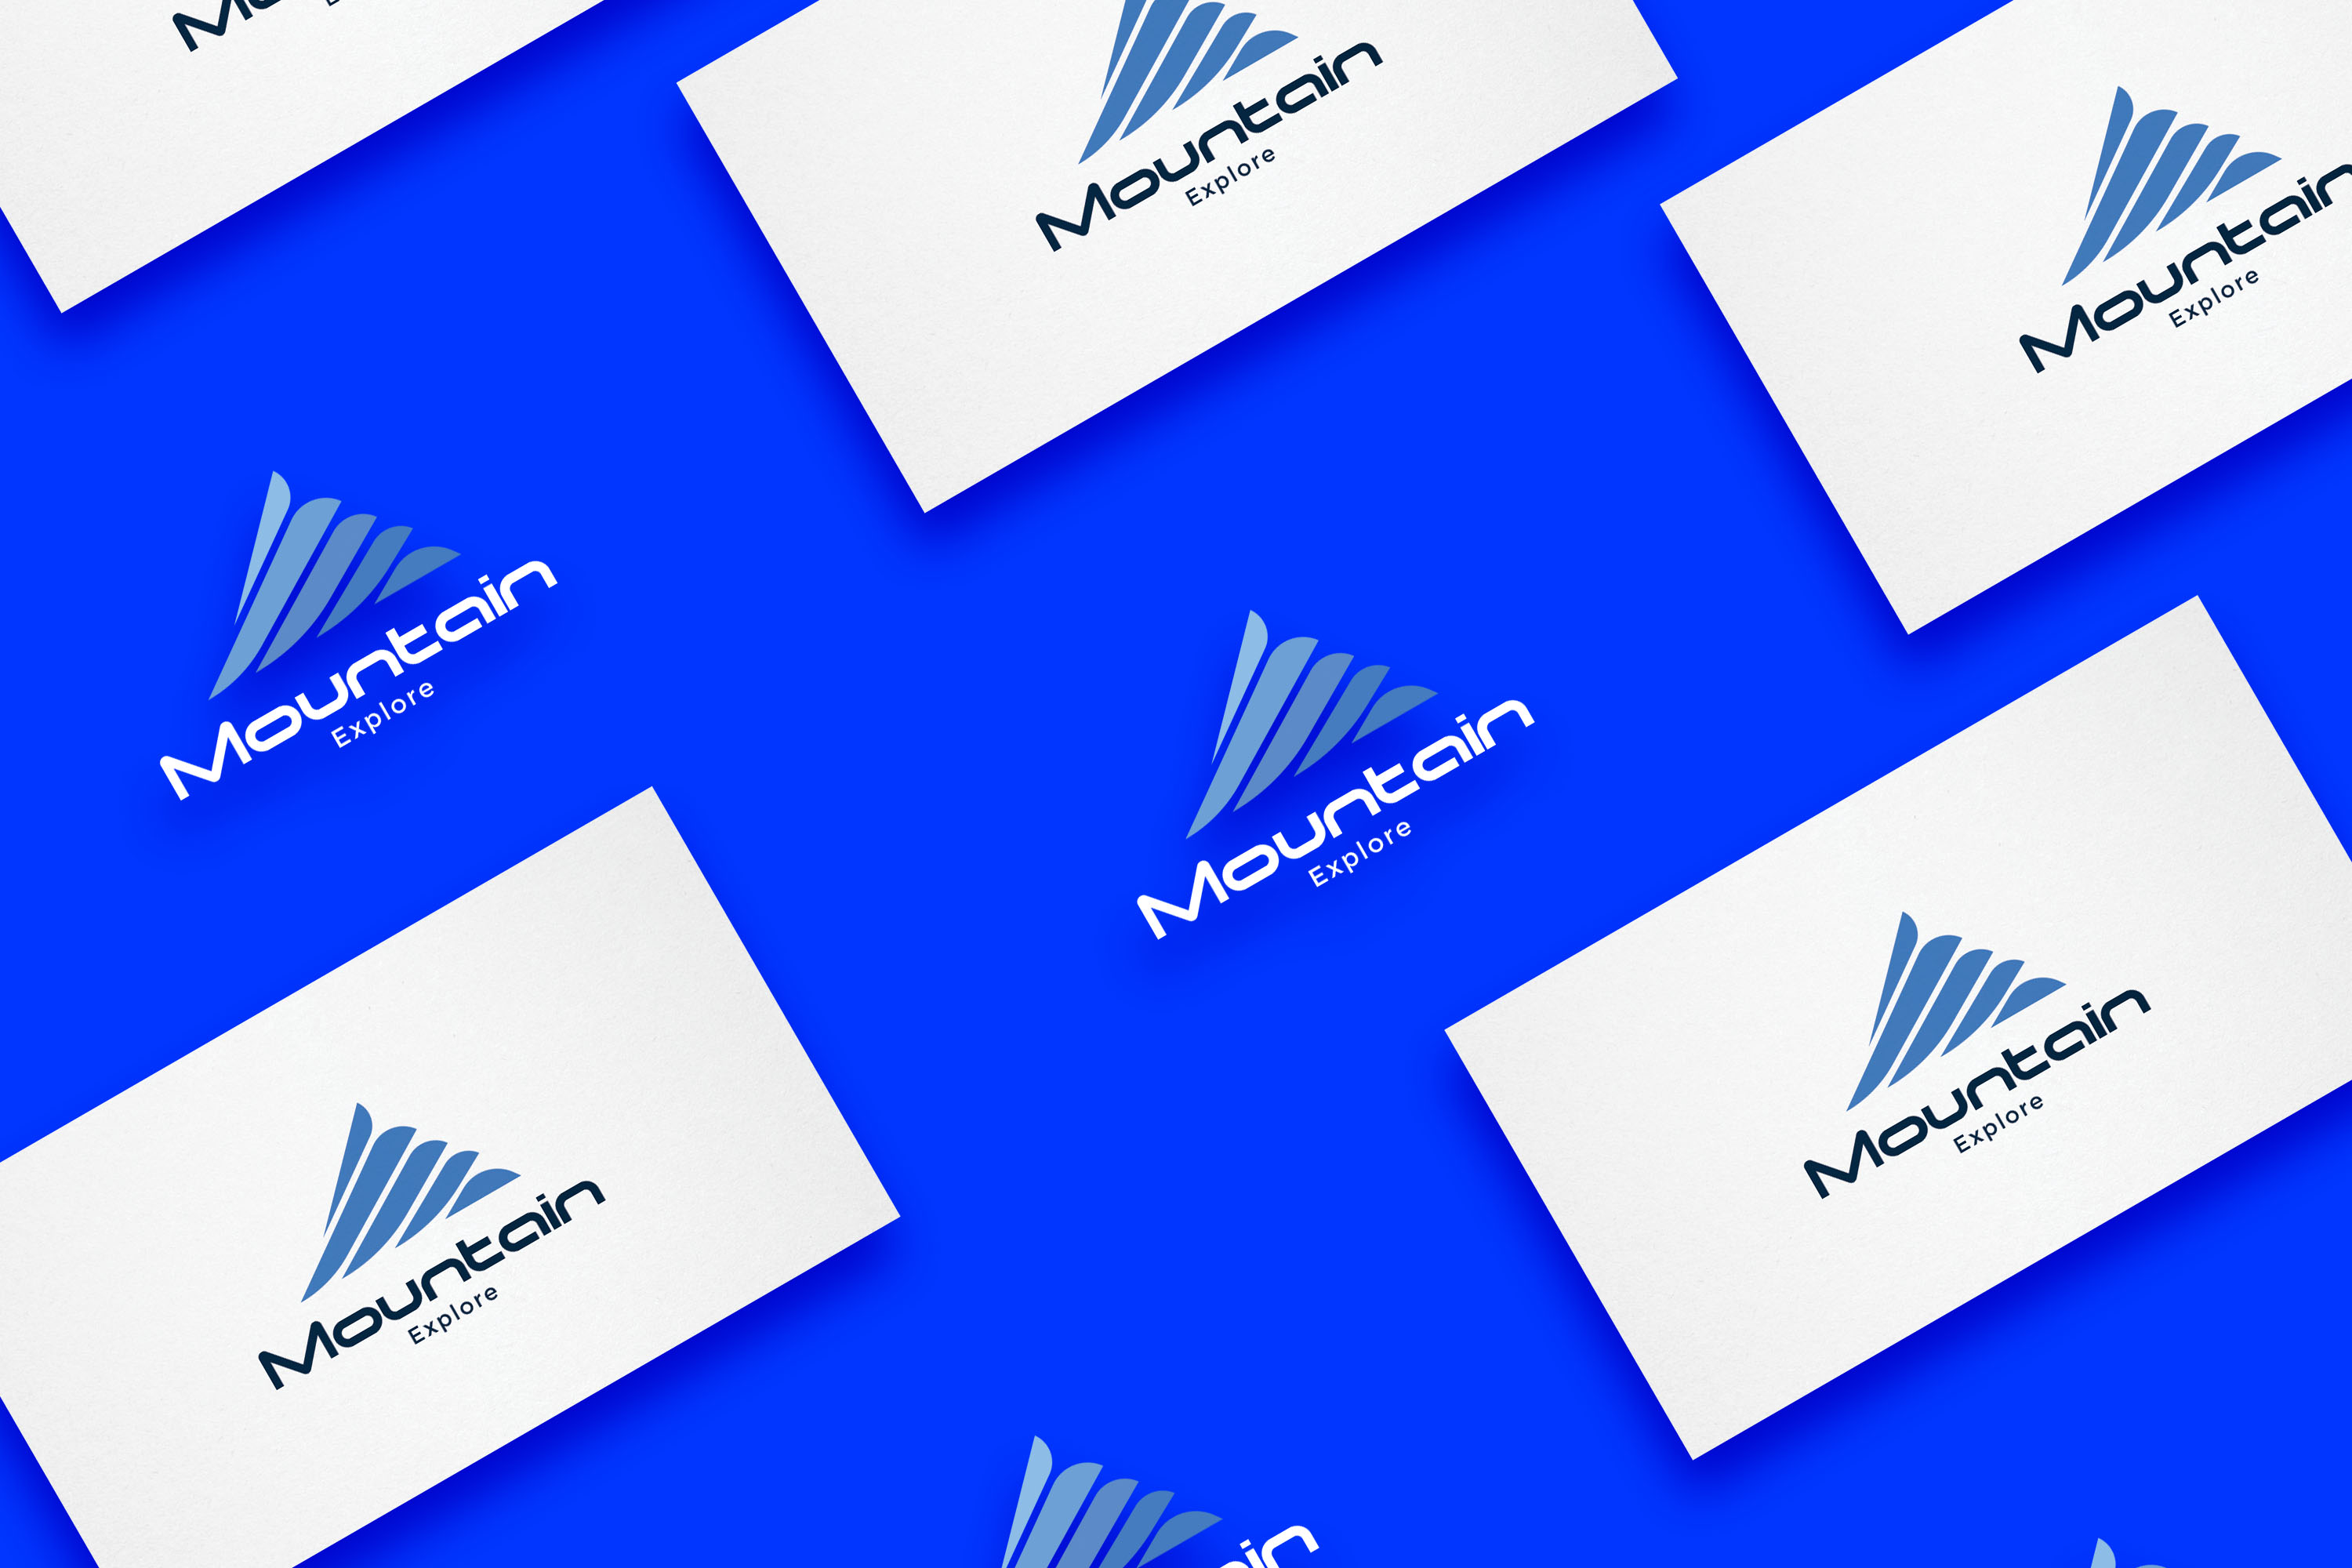 Bunch of business cards that are on a blue surface.